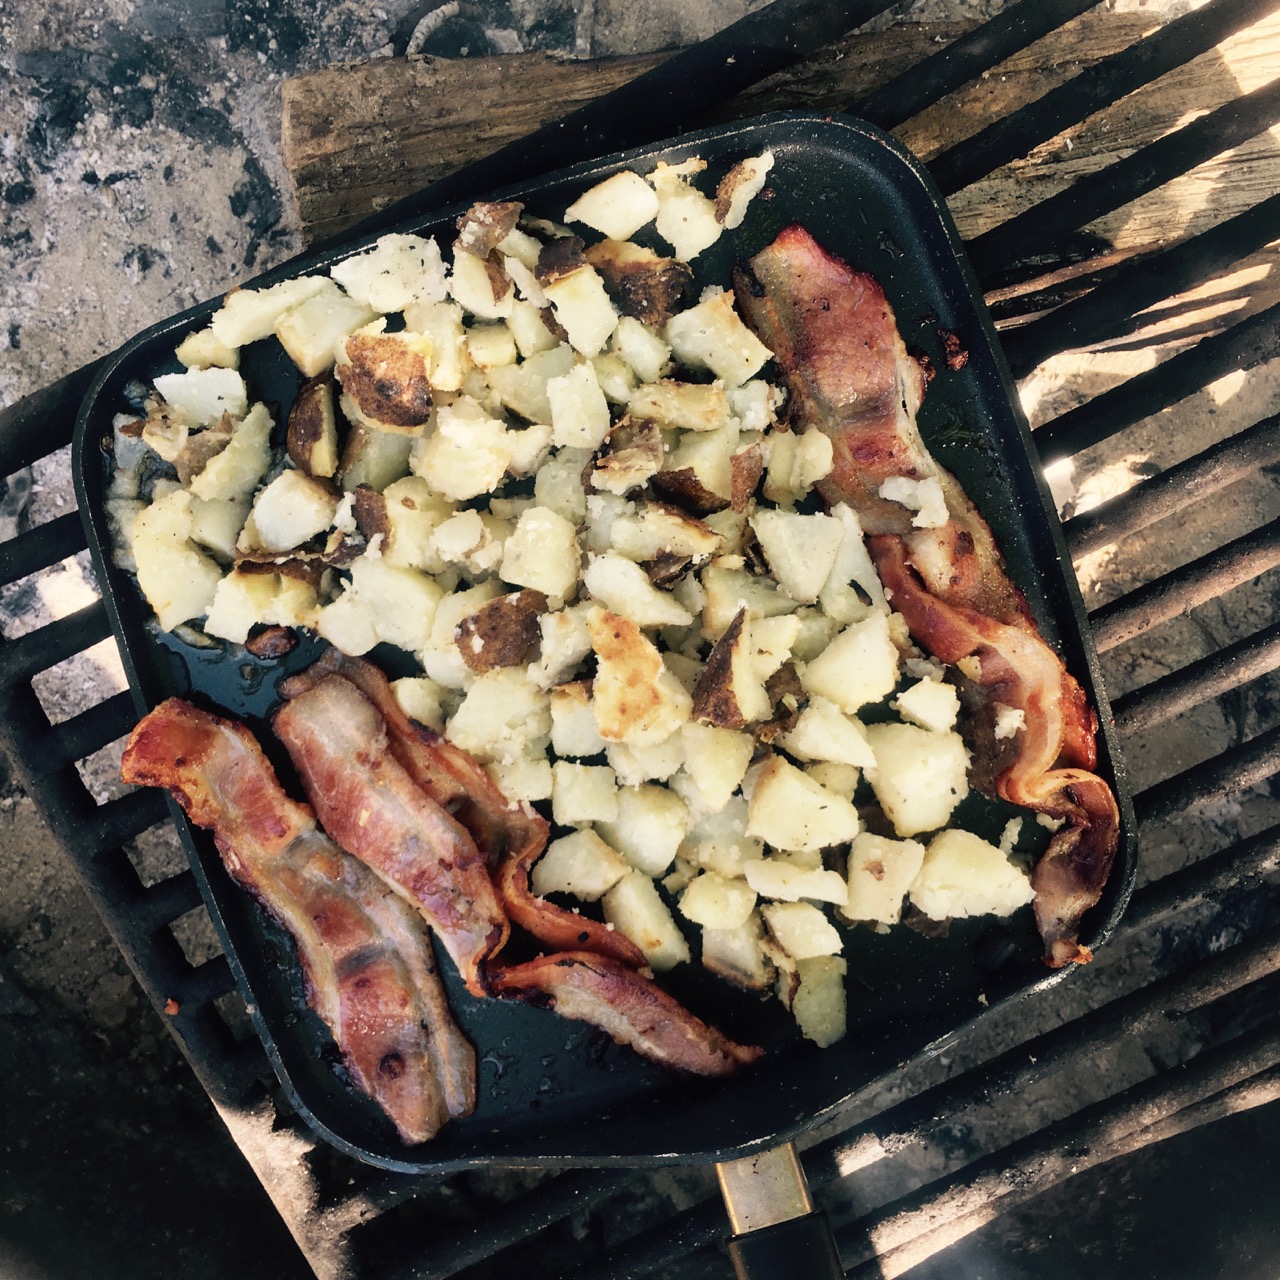 camping breakfast using leftovers from dinner